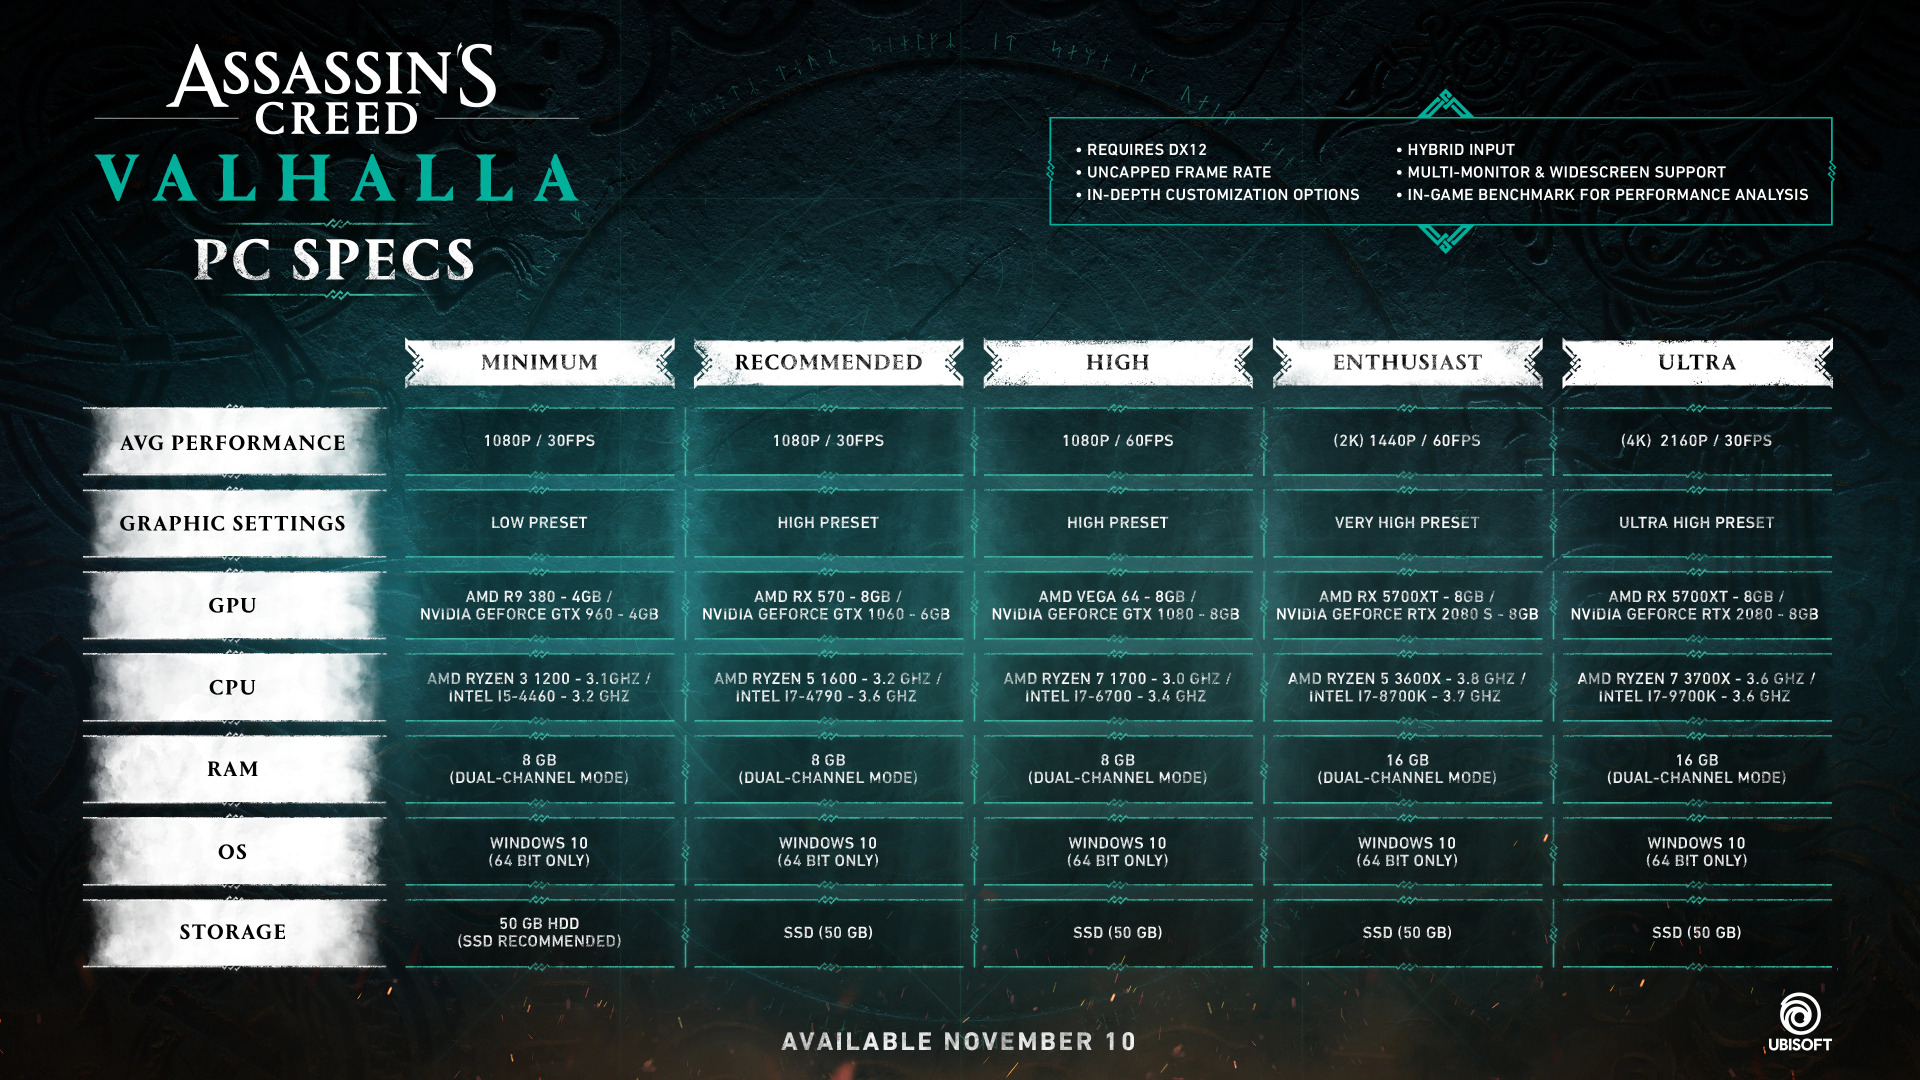 Assassin's Creed Valhalla Goes Gold As November 10 Launch Date Approaches